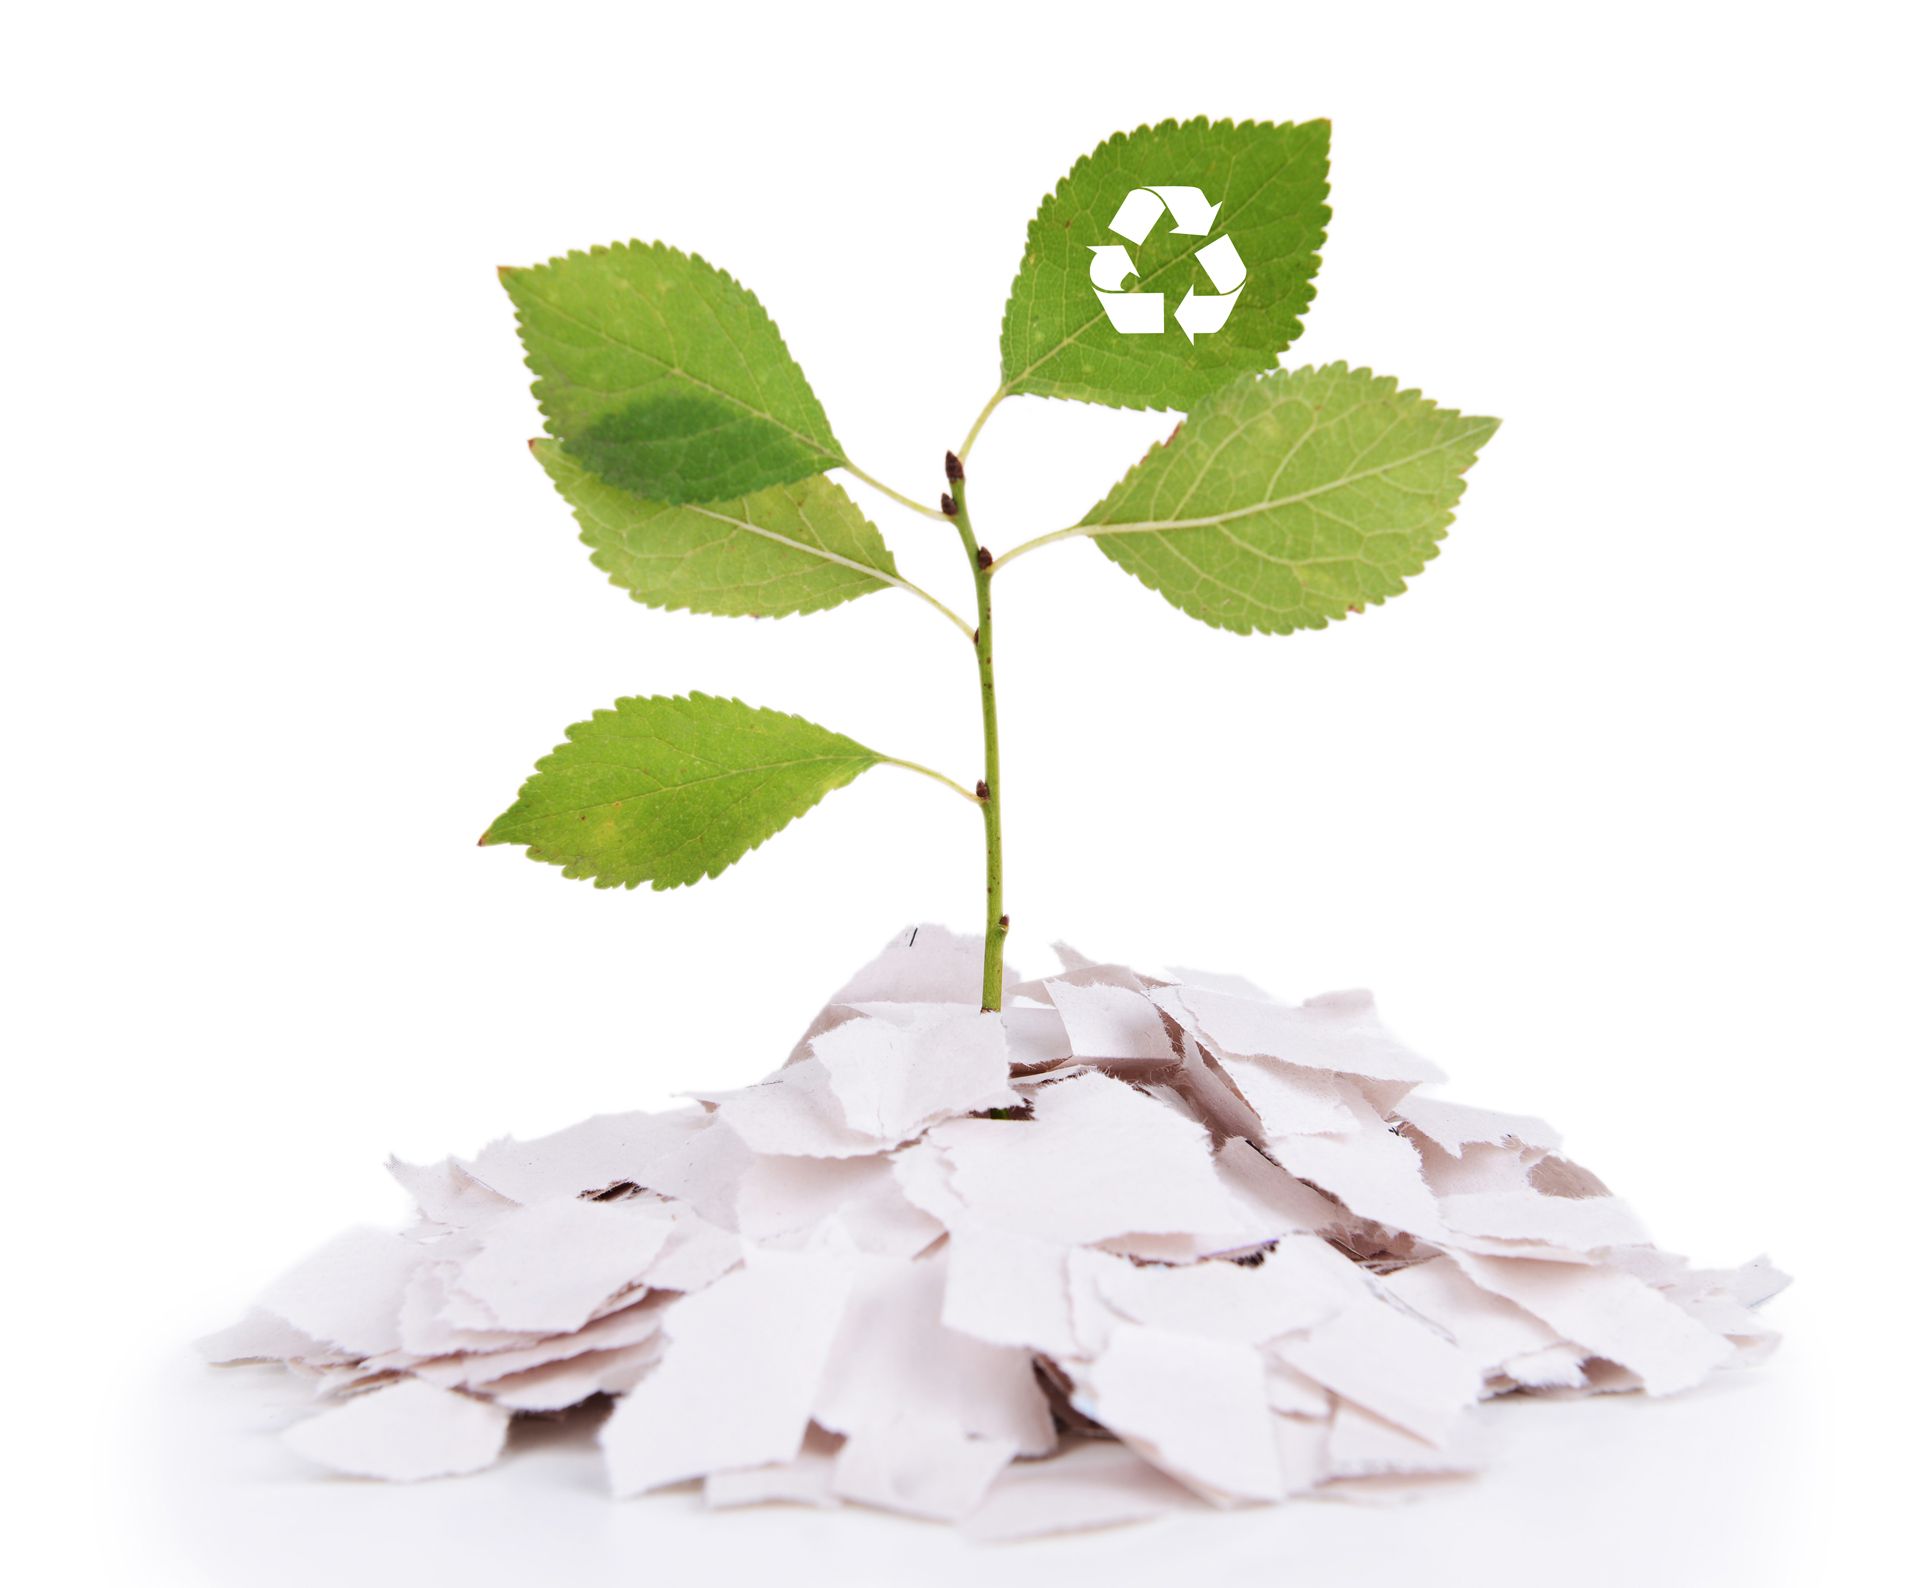 Symbol for recycling paper with a plant and torn up paper underneath